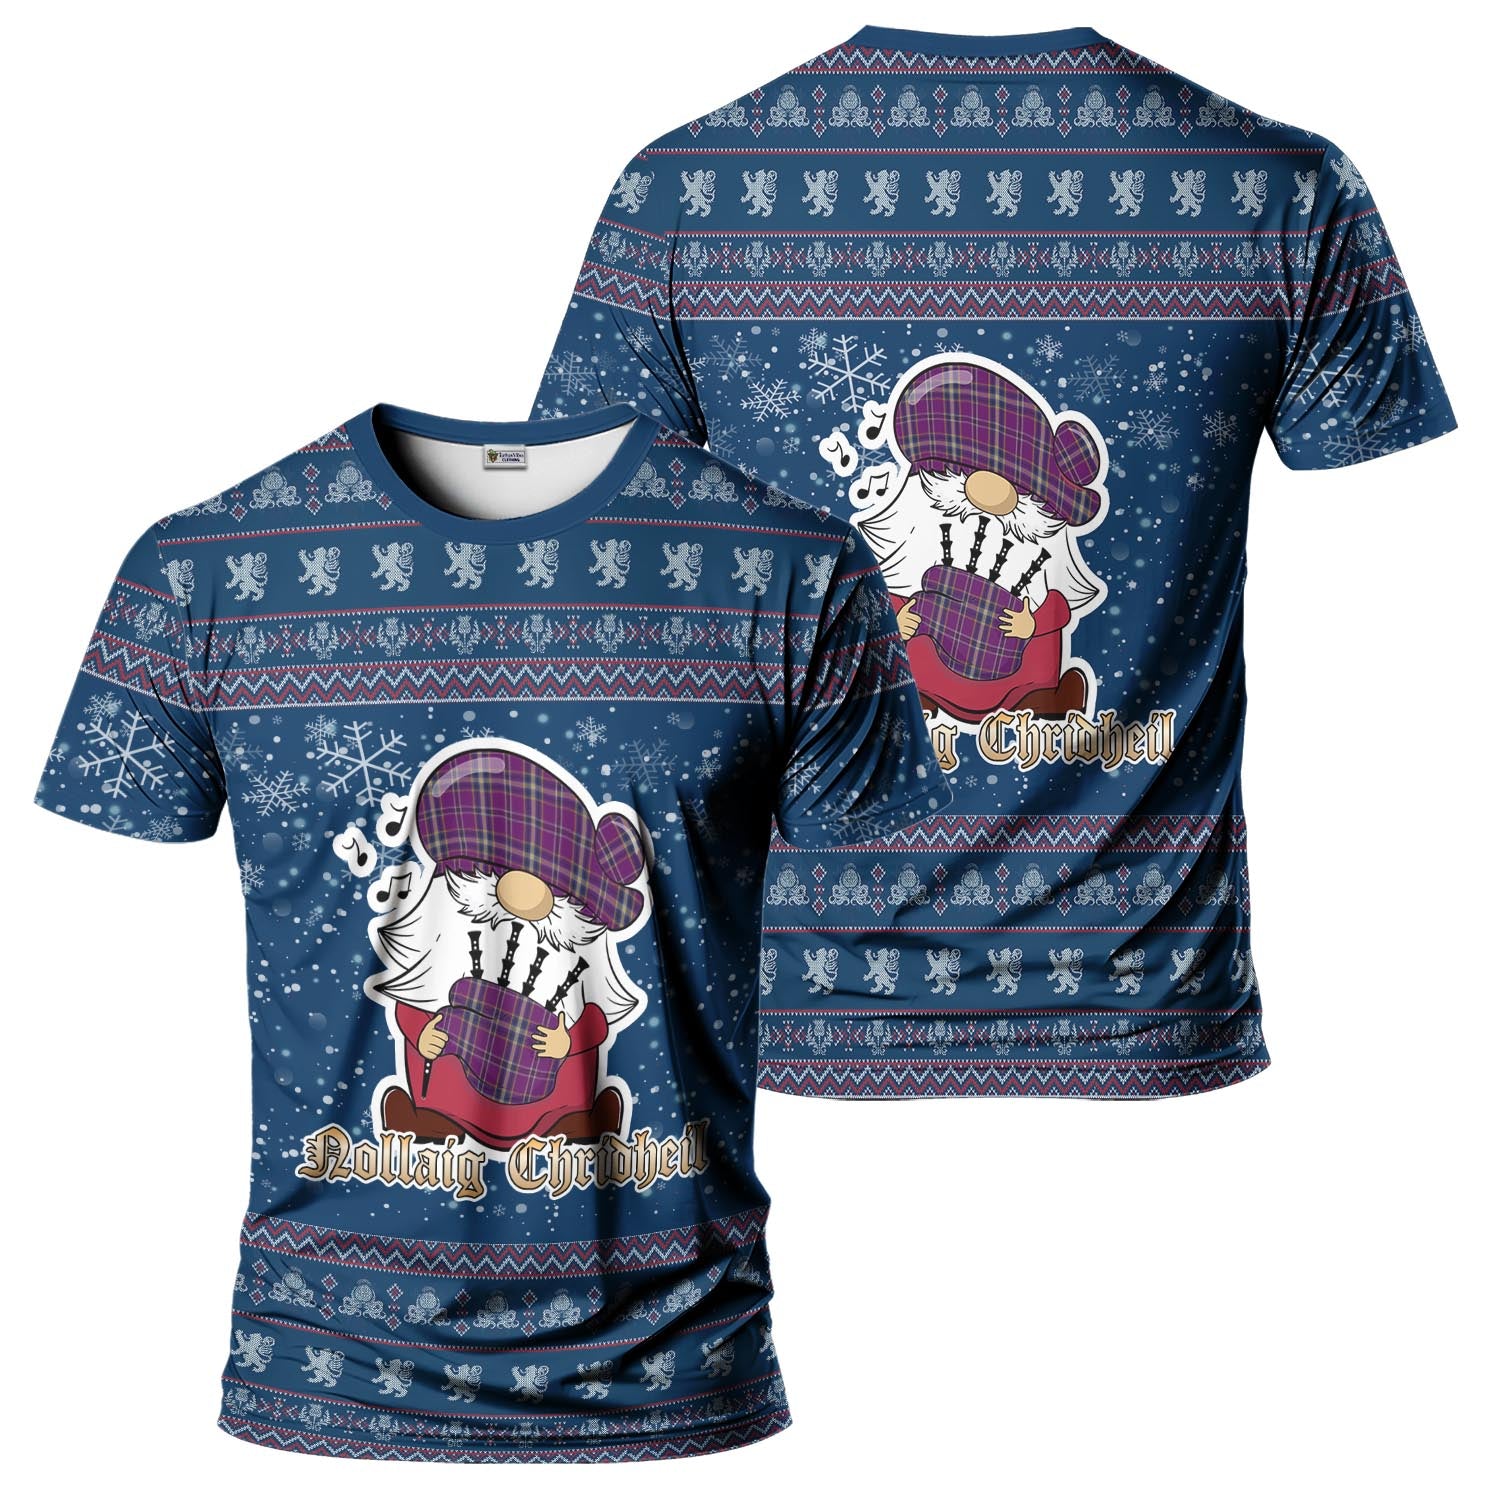 O'Riagain Clan Christmas Family T-Shirt with Funny Gnome Playing Bagpipes Kid's Shirt Blue - Tartanvibesclothing